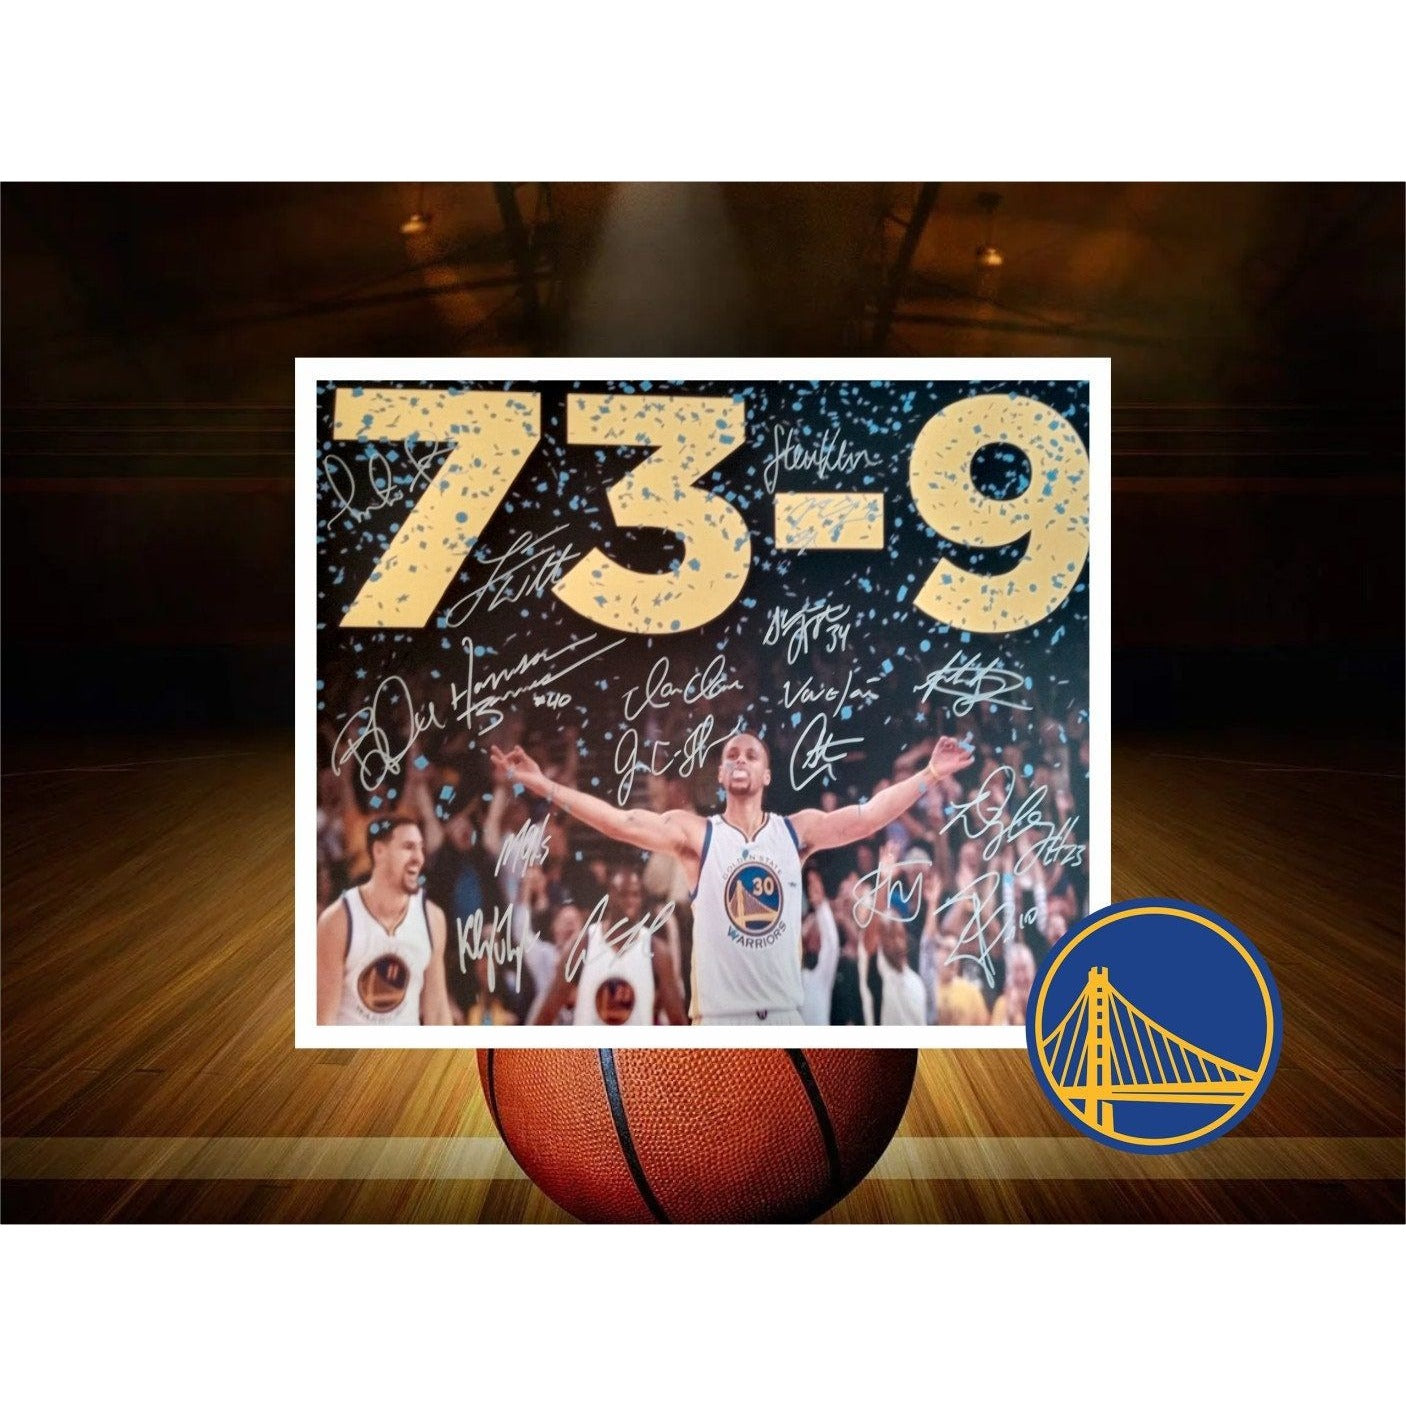 Draymond Green Steve Kerr Steph Curry Klay Thompson Golden State Warriors 16 x 20 photo signed with proof